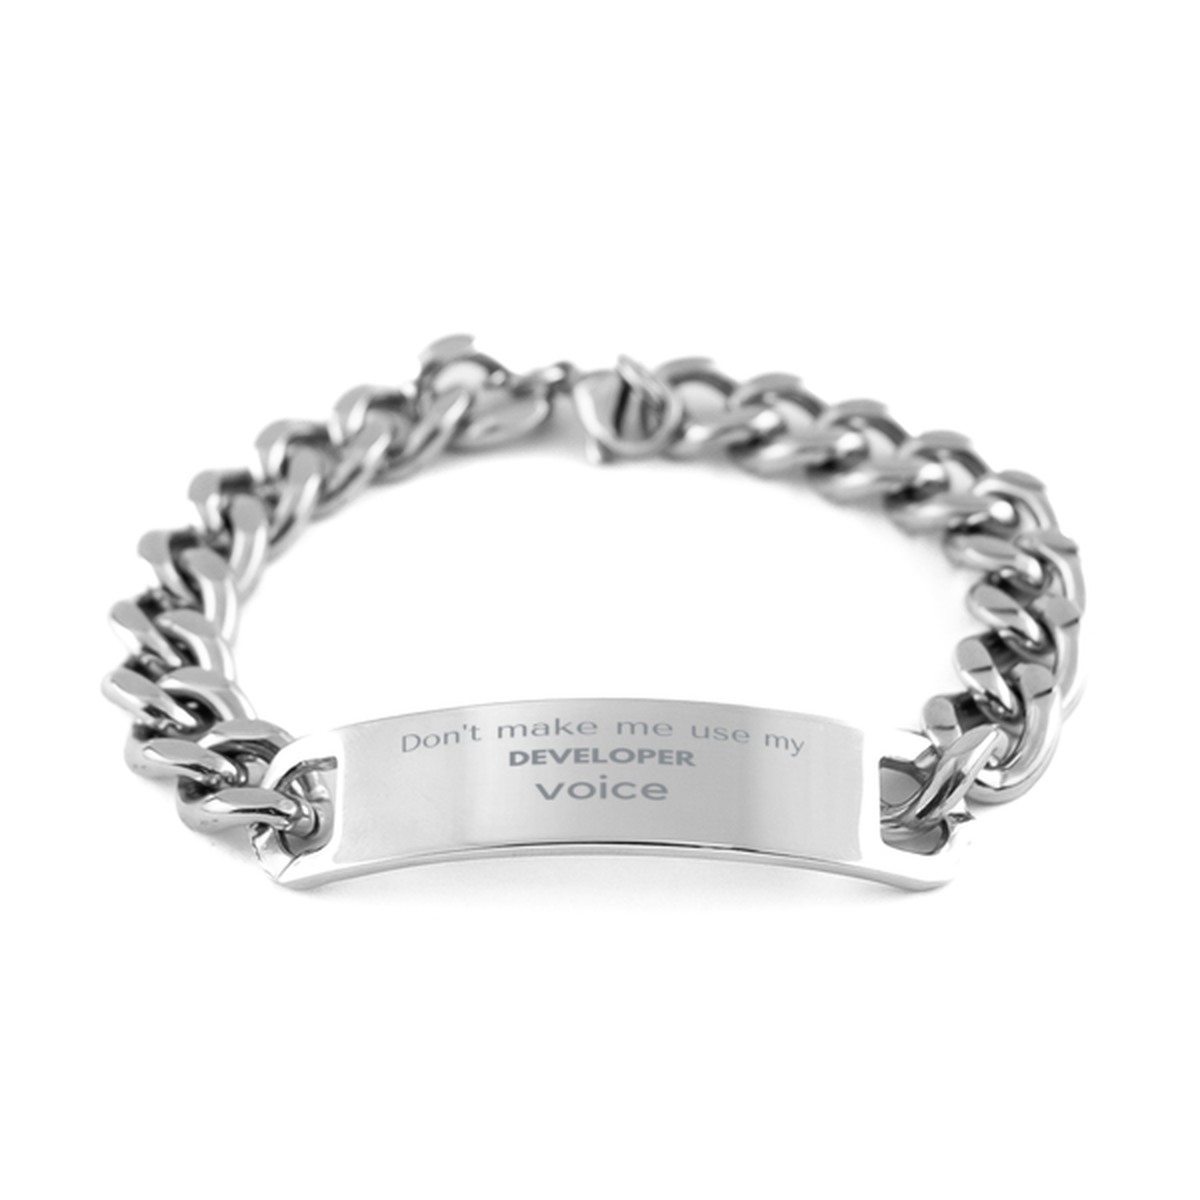 Don't make me use my Developer voice, Sarcasm Developer Gifts, Christmas Developer Cuban Chain Stainless Steel Bracelet Birthday Unique Gifts For Developer Coworkers, Men, Women, Colleague, Friends